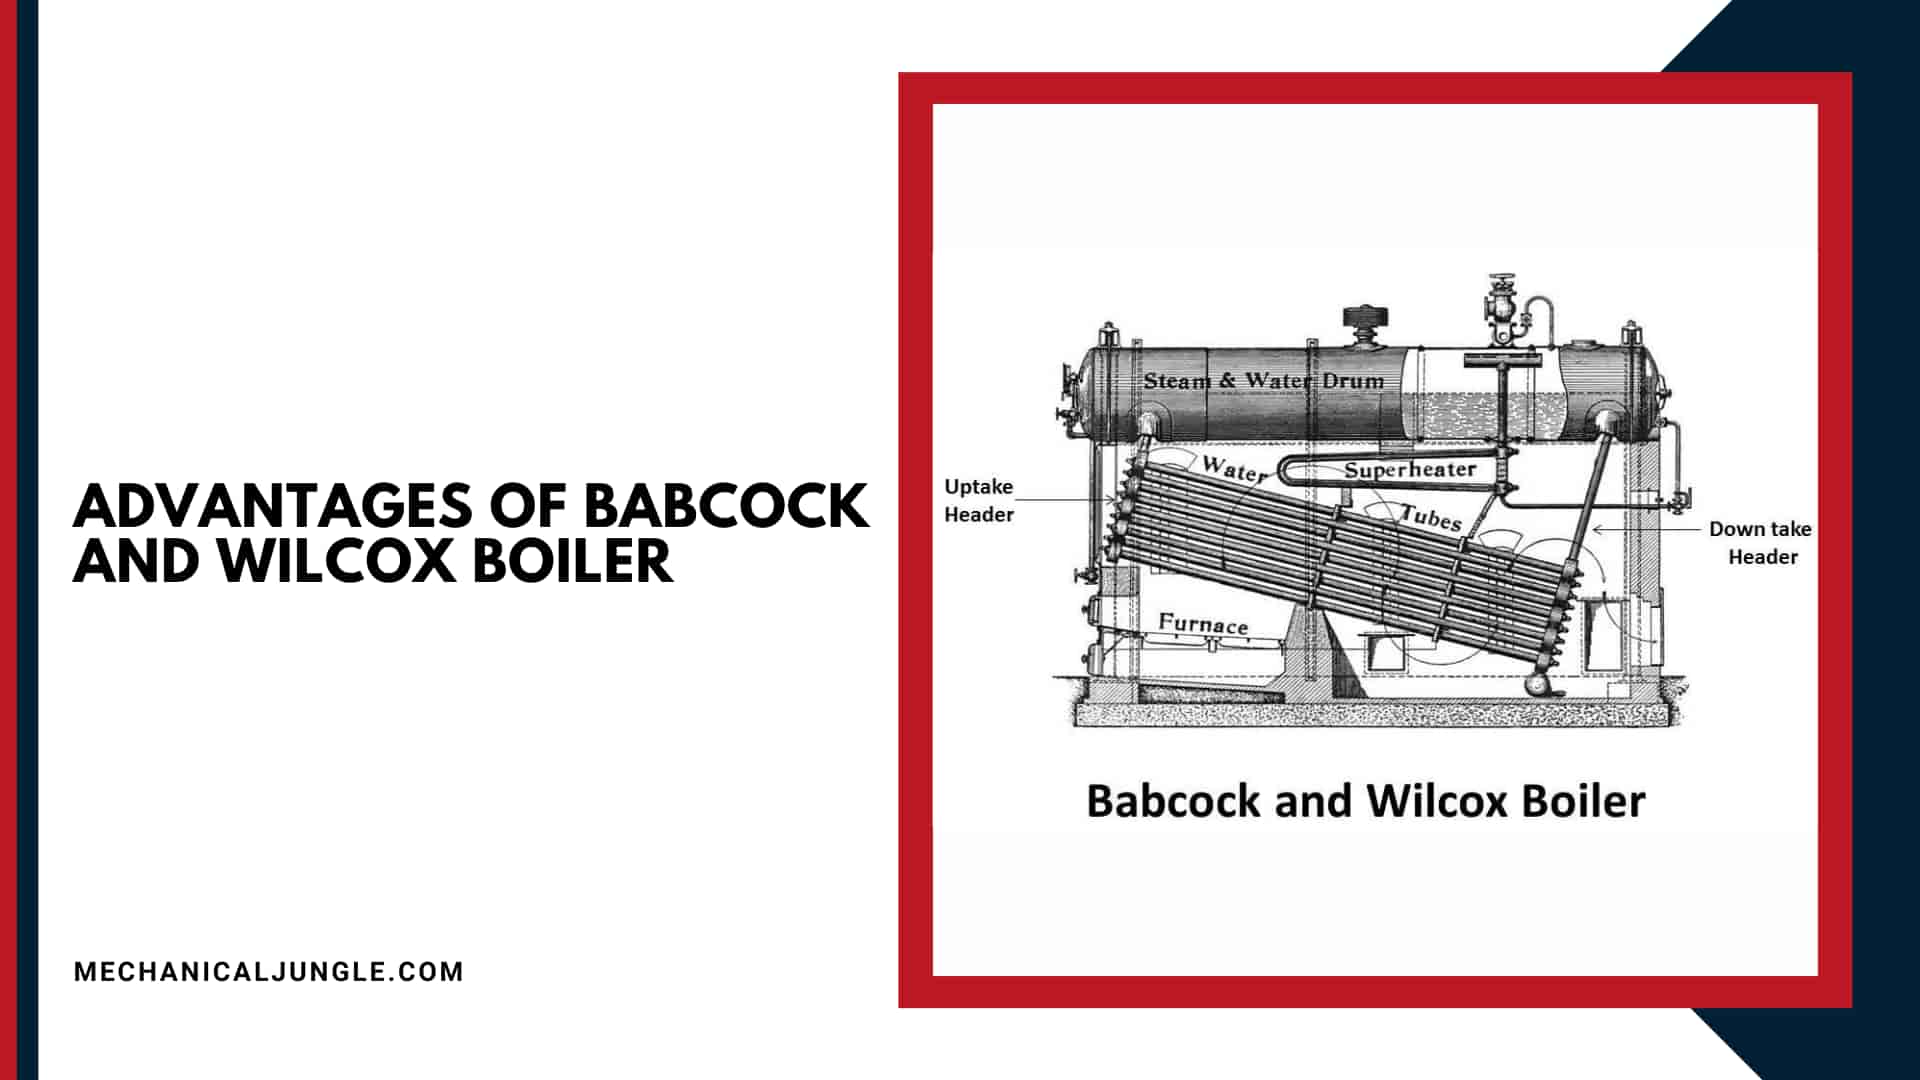 Advantages of Babcock and Wilcox Boiler